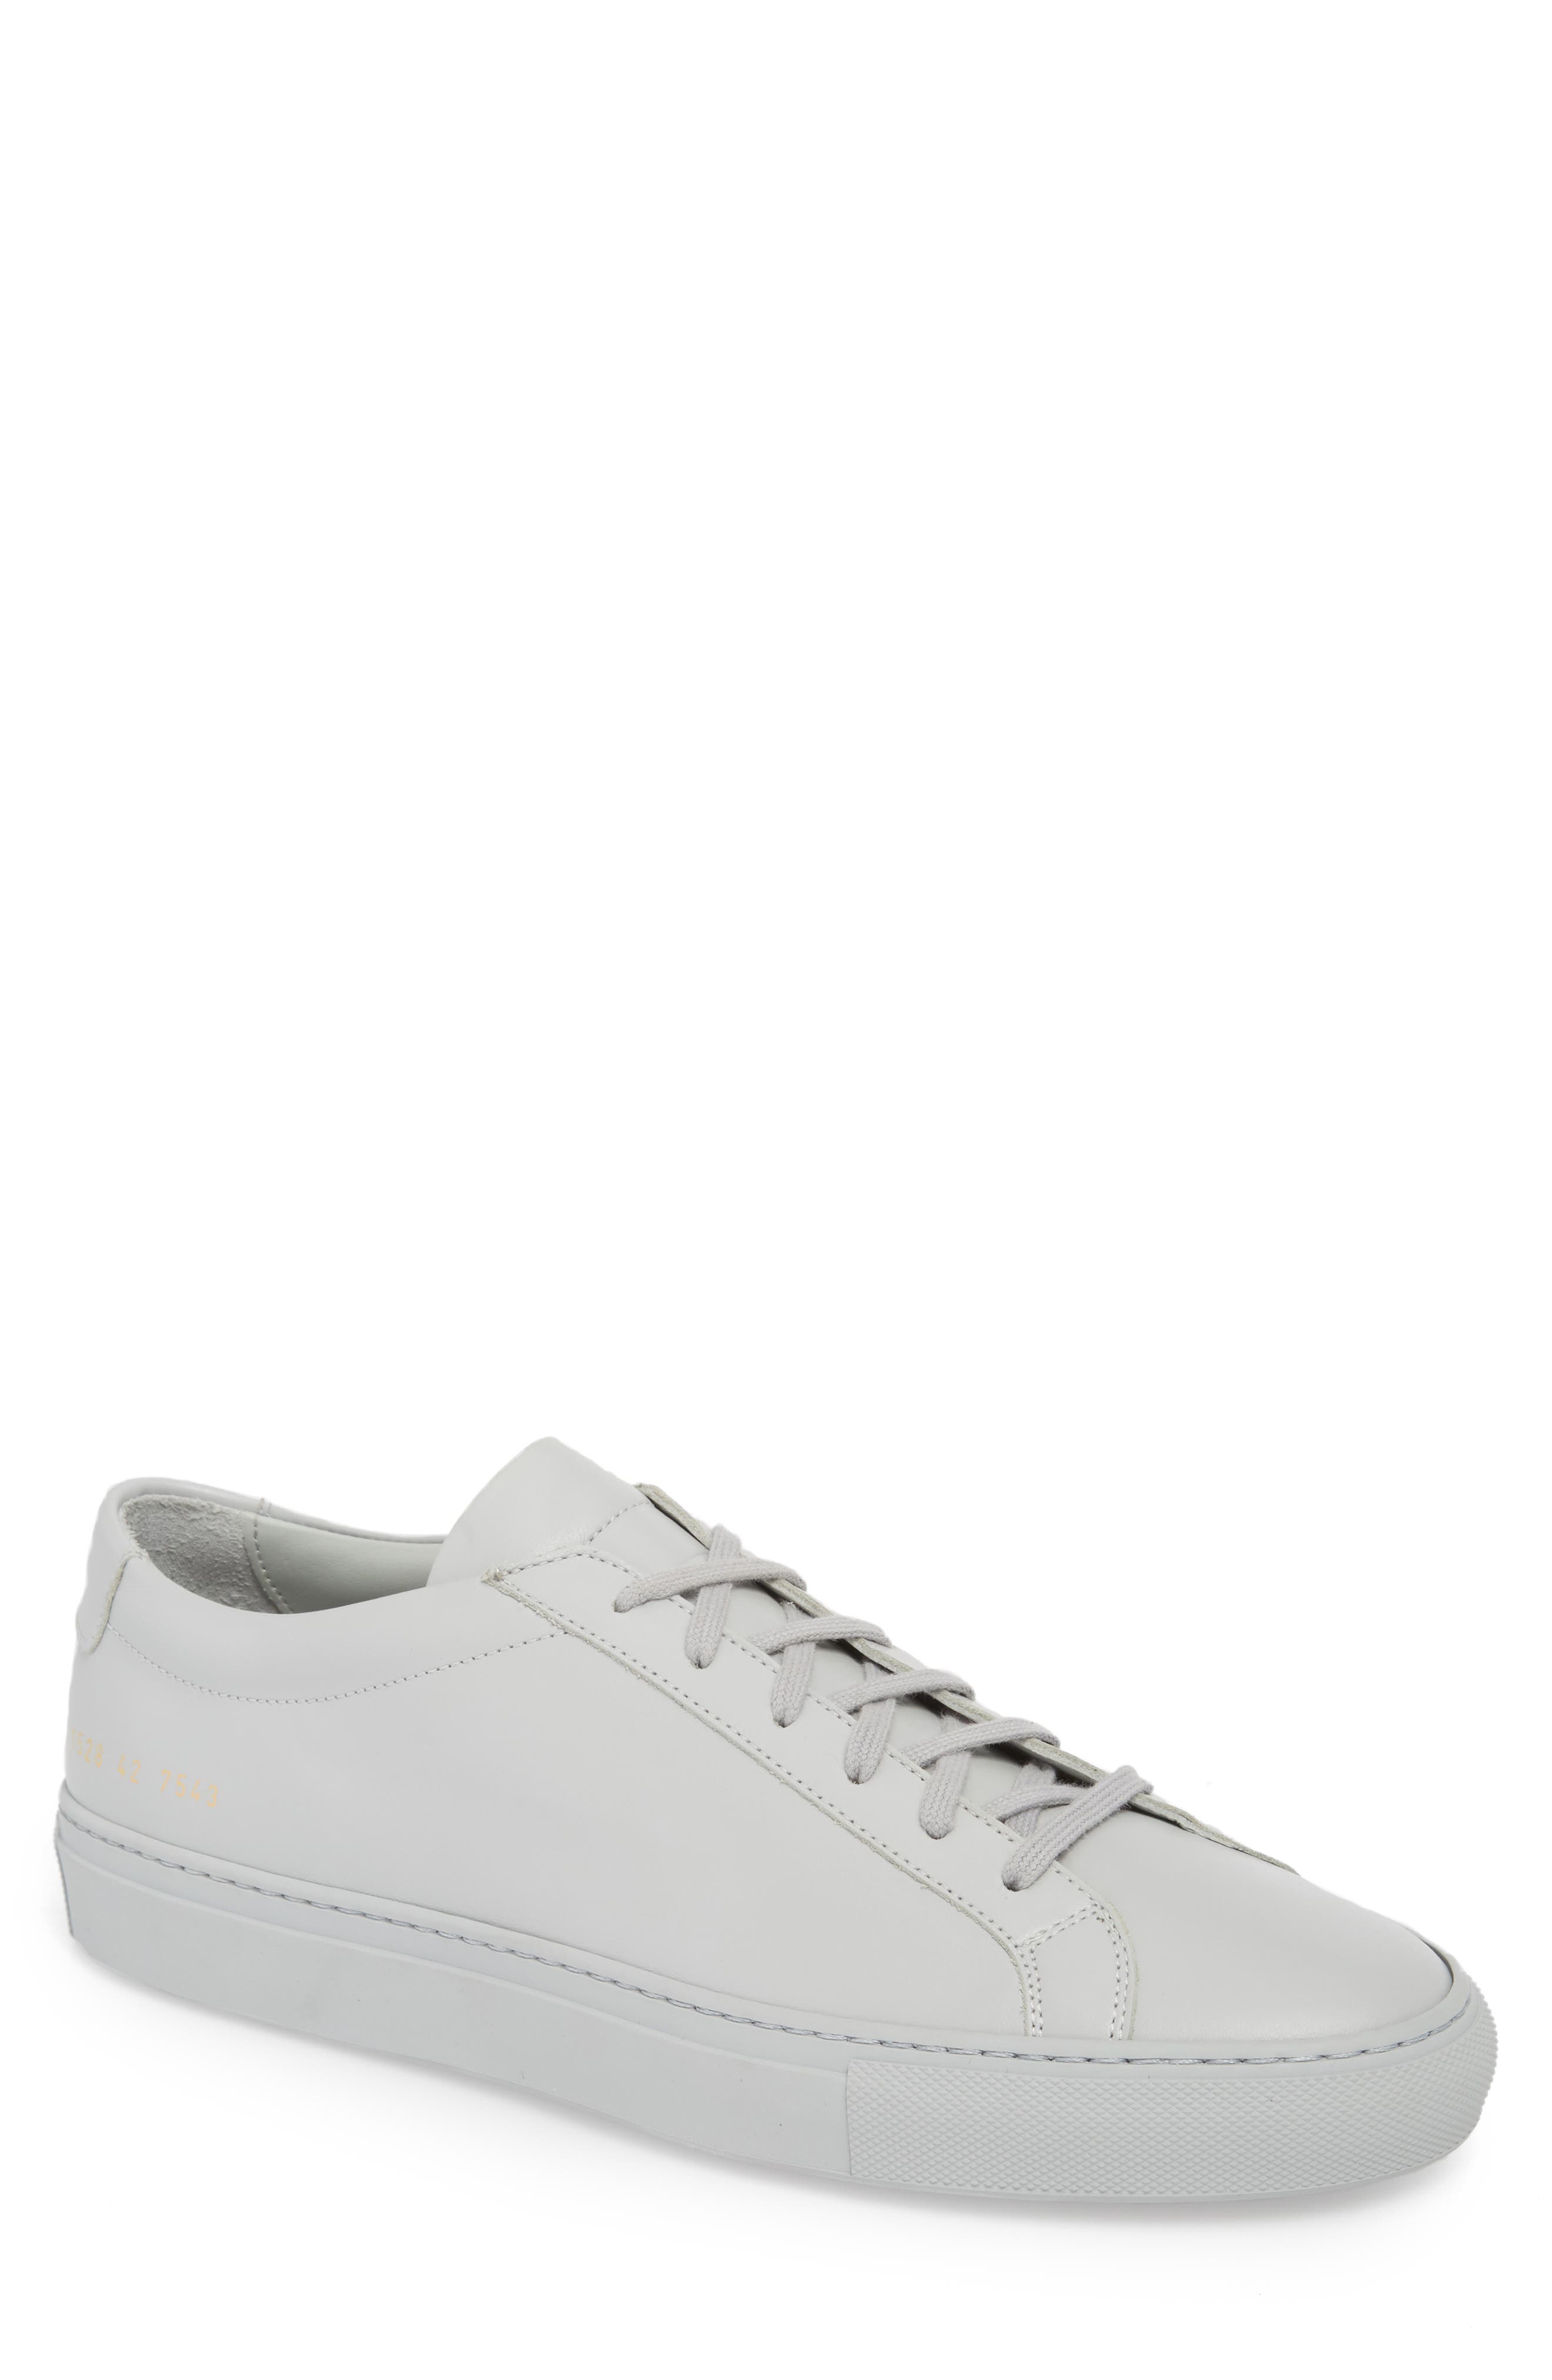 white sneakers similar to common projects